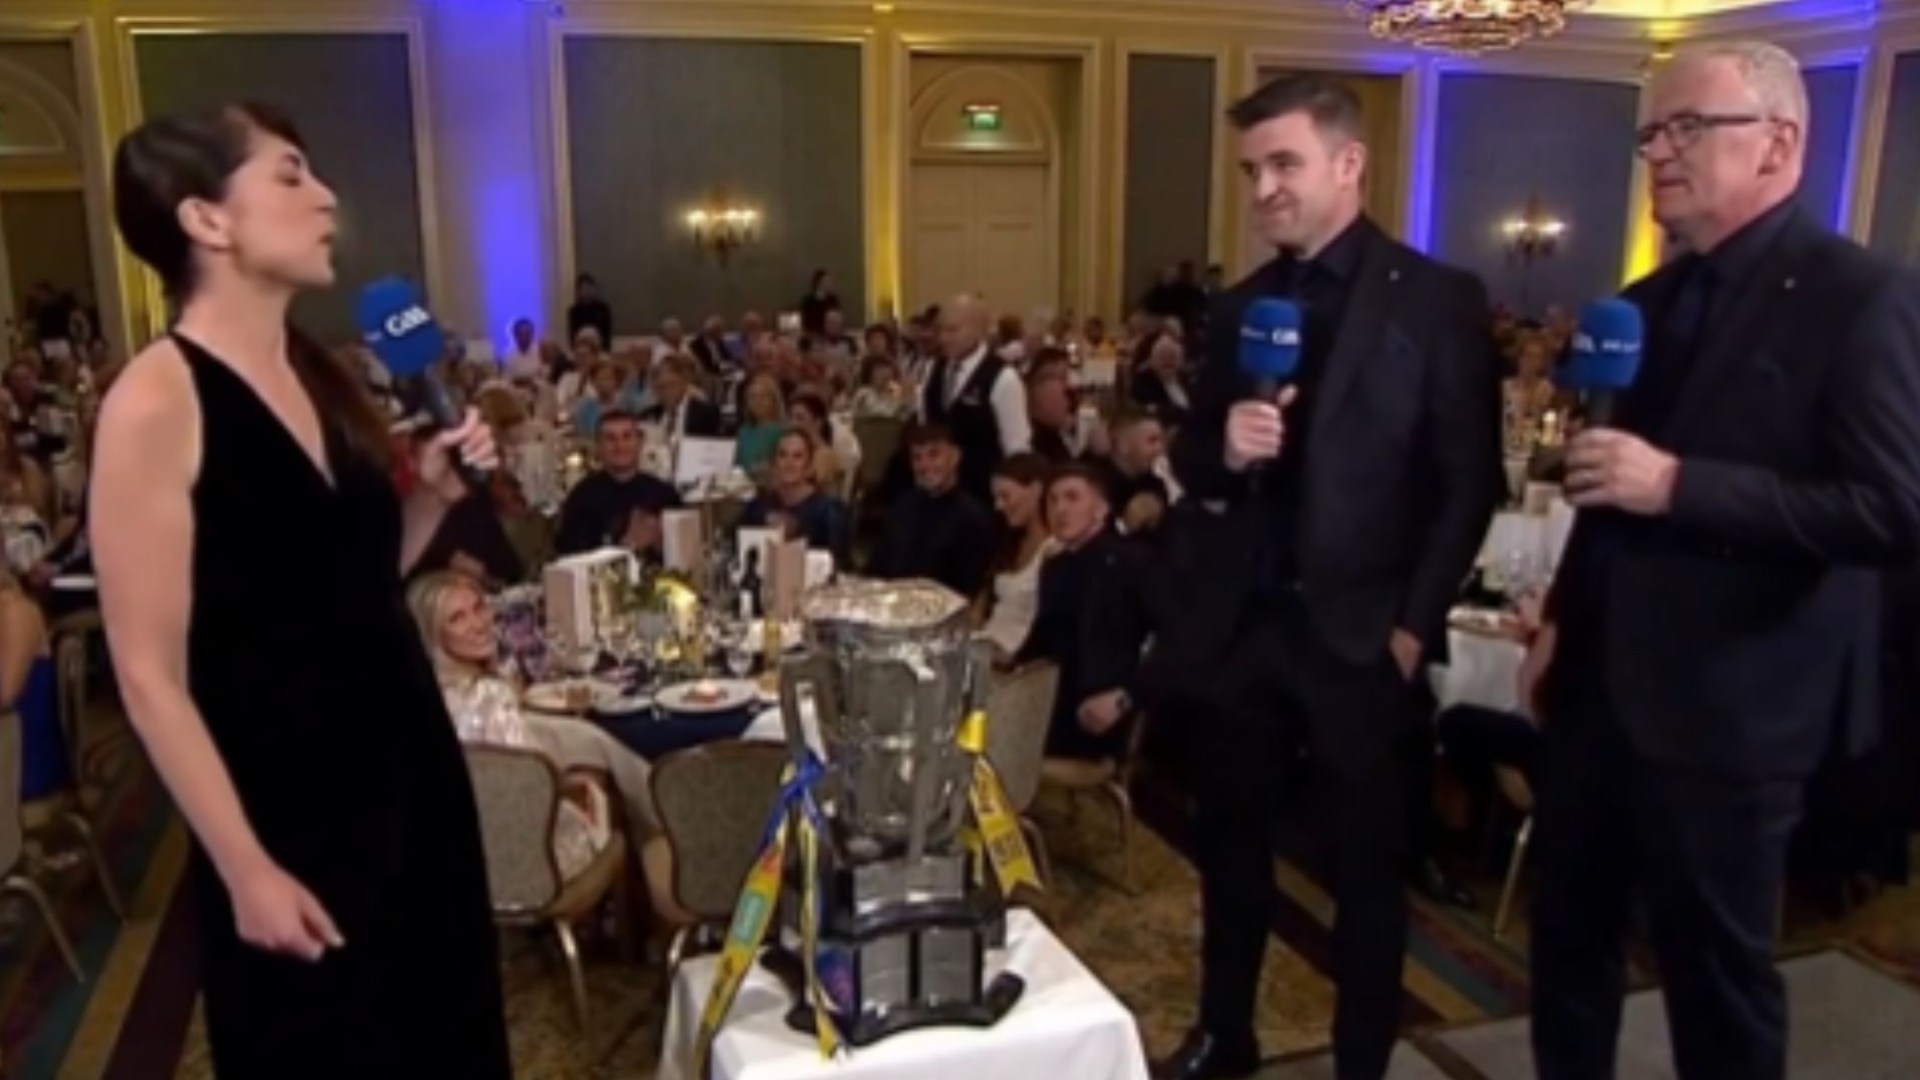 Tony Kelly aims brilliant one-liner at John Conlon during All-Ireland banquet live on The Sunday Game [Video]